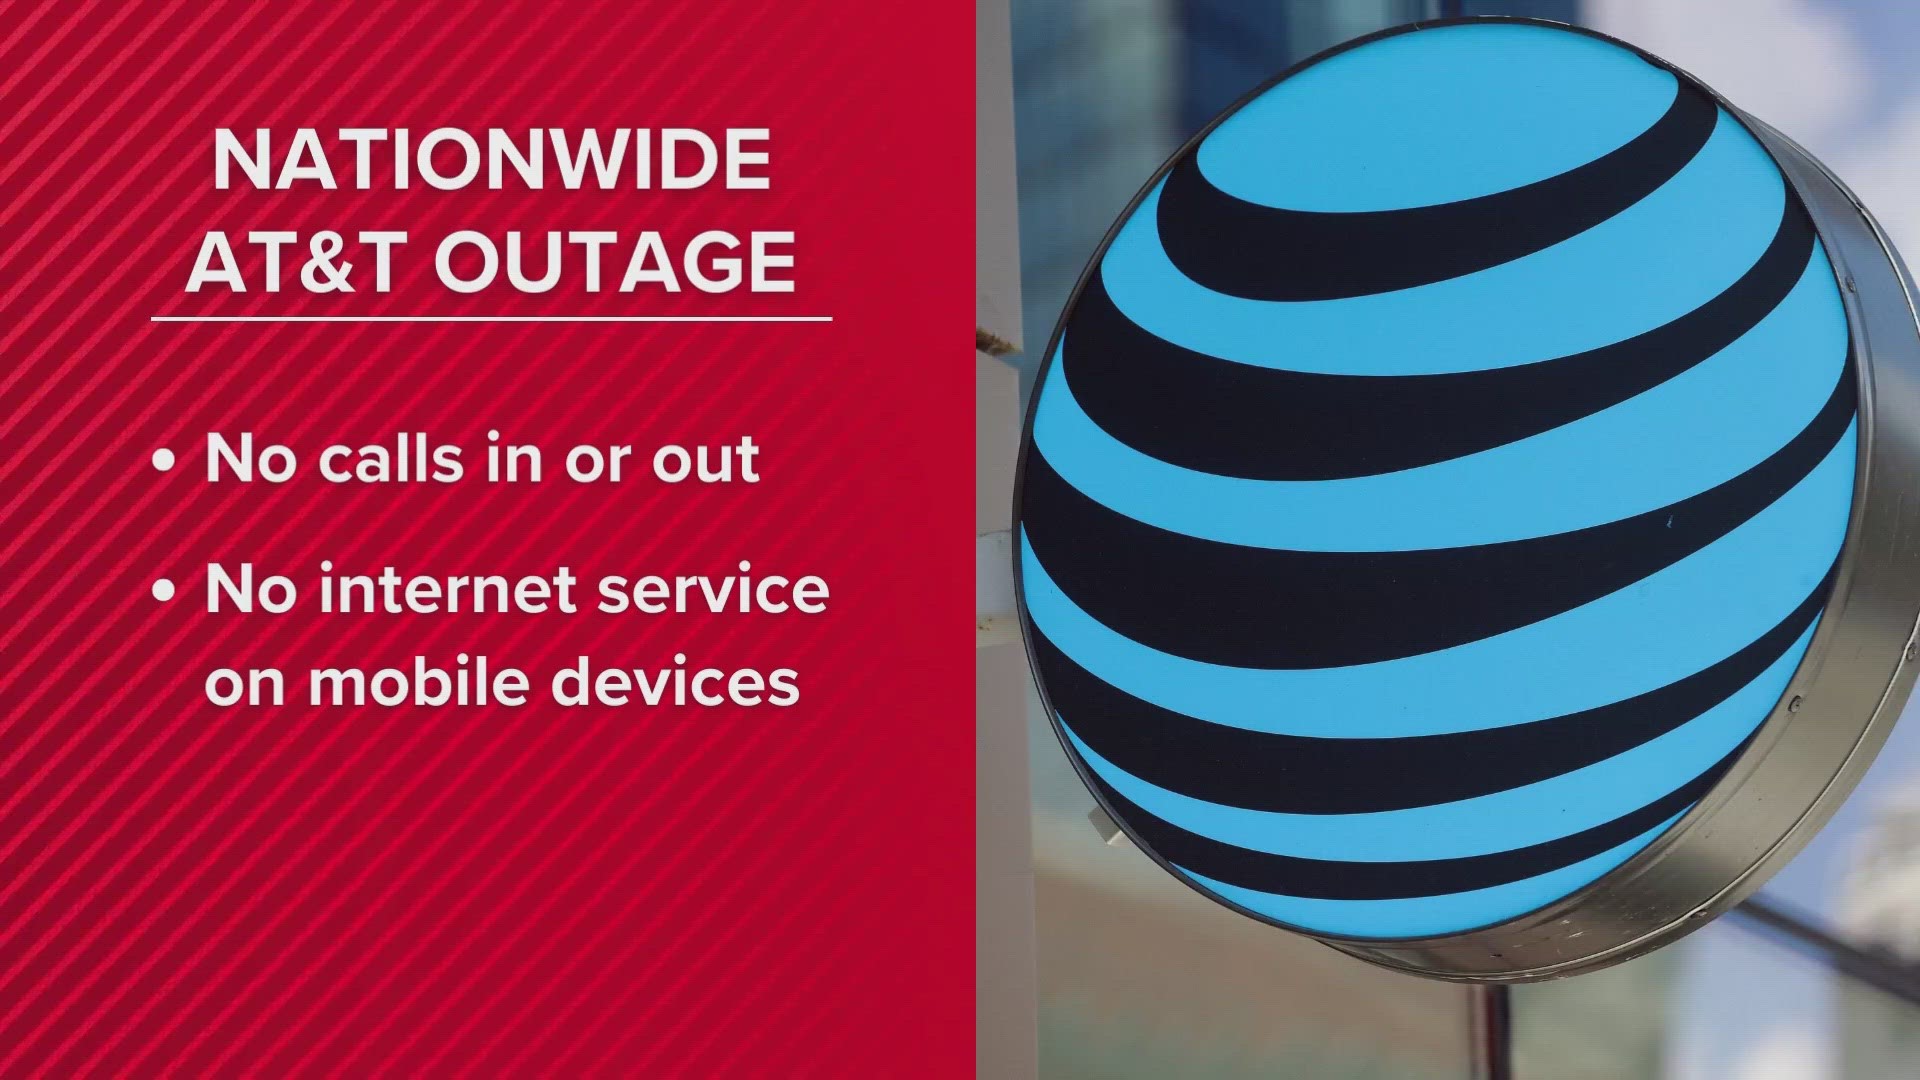 AT&T users across the US woke up Thursday morning realizing their phone services were down.